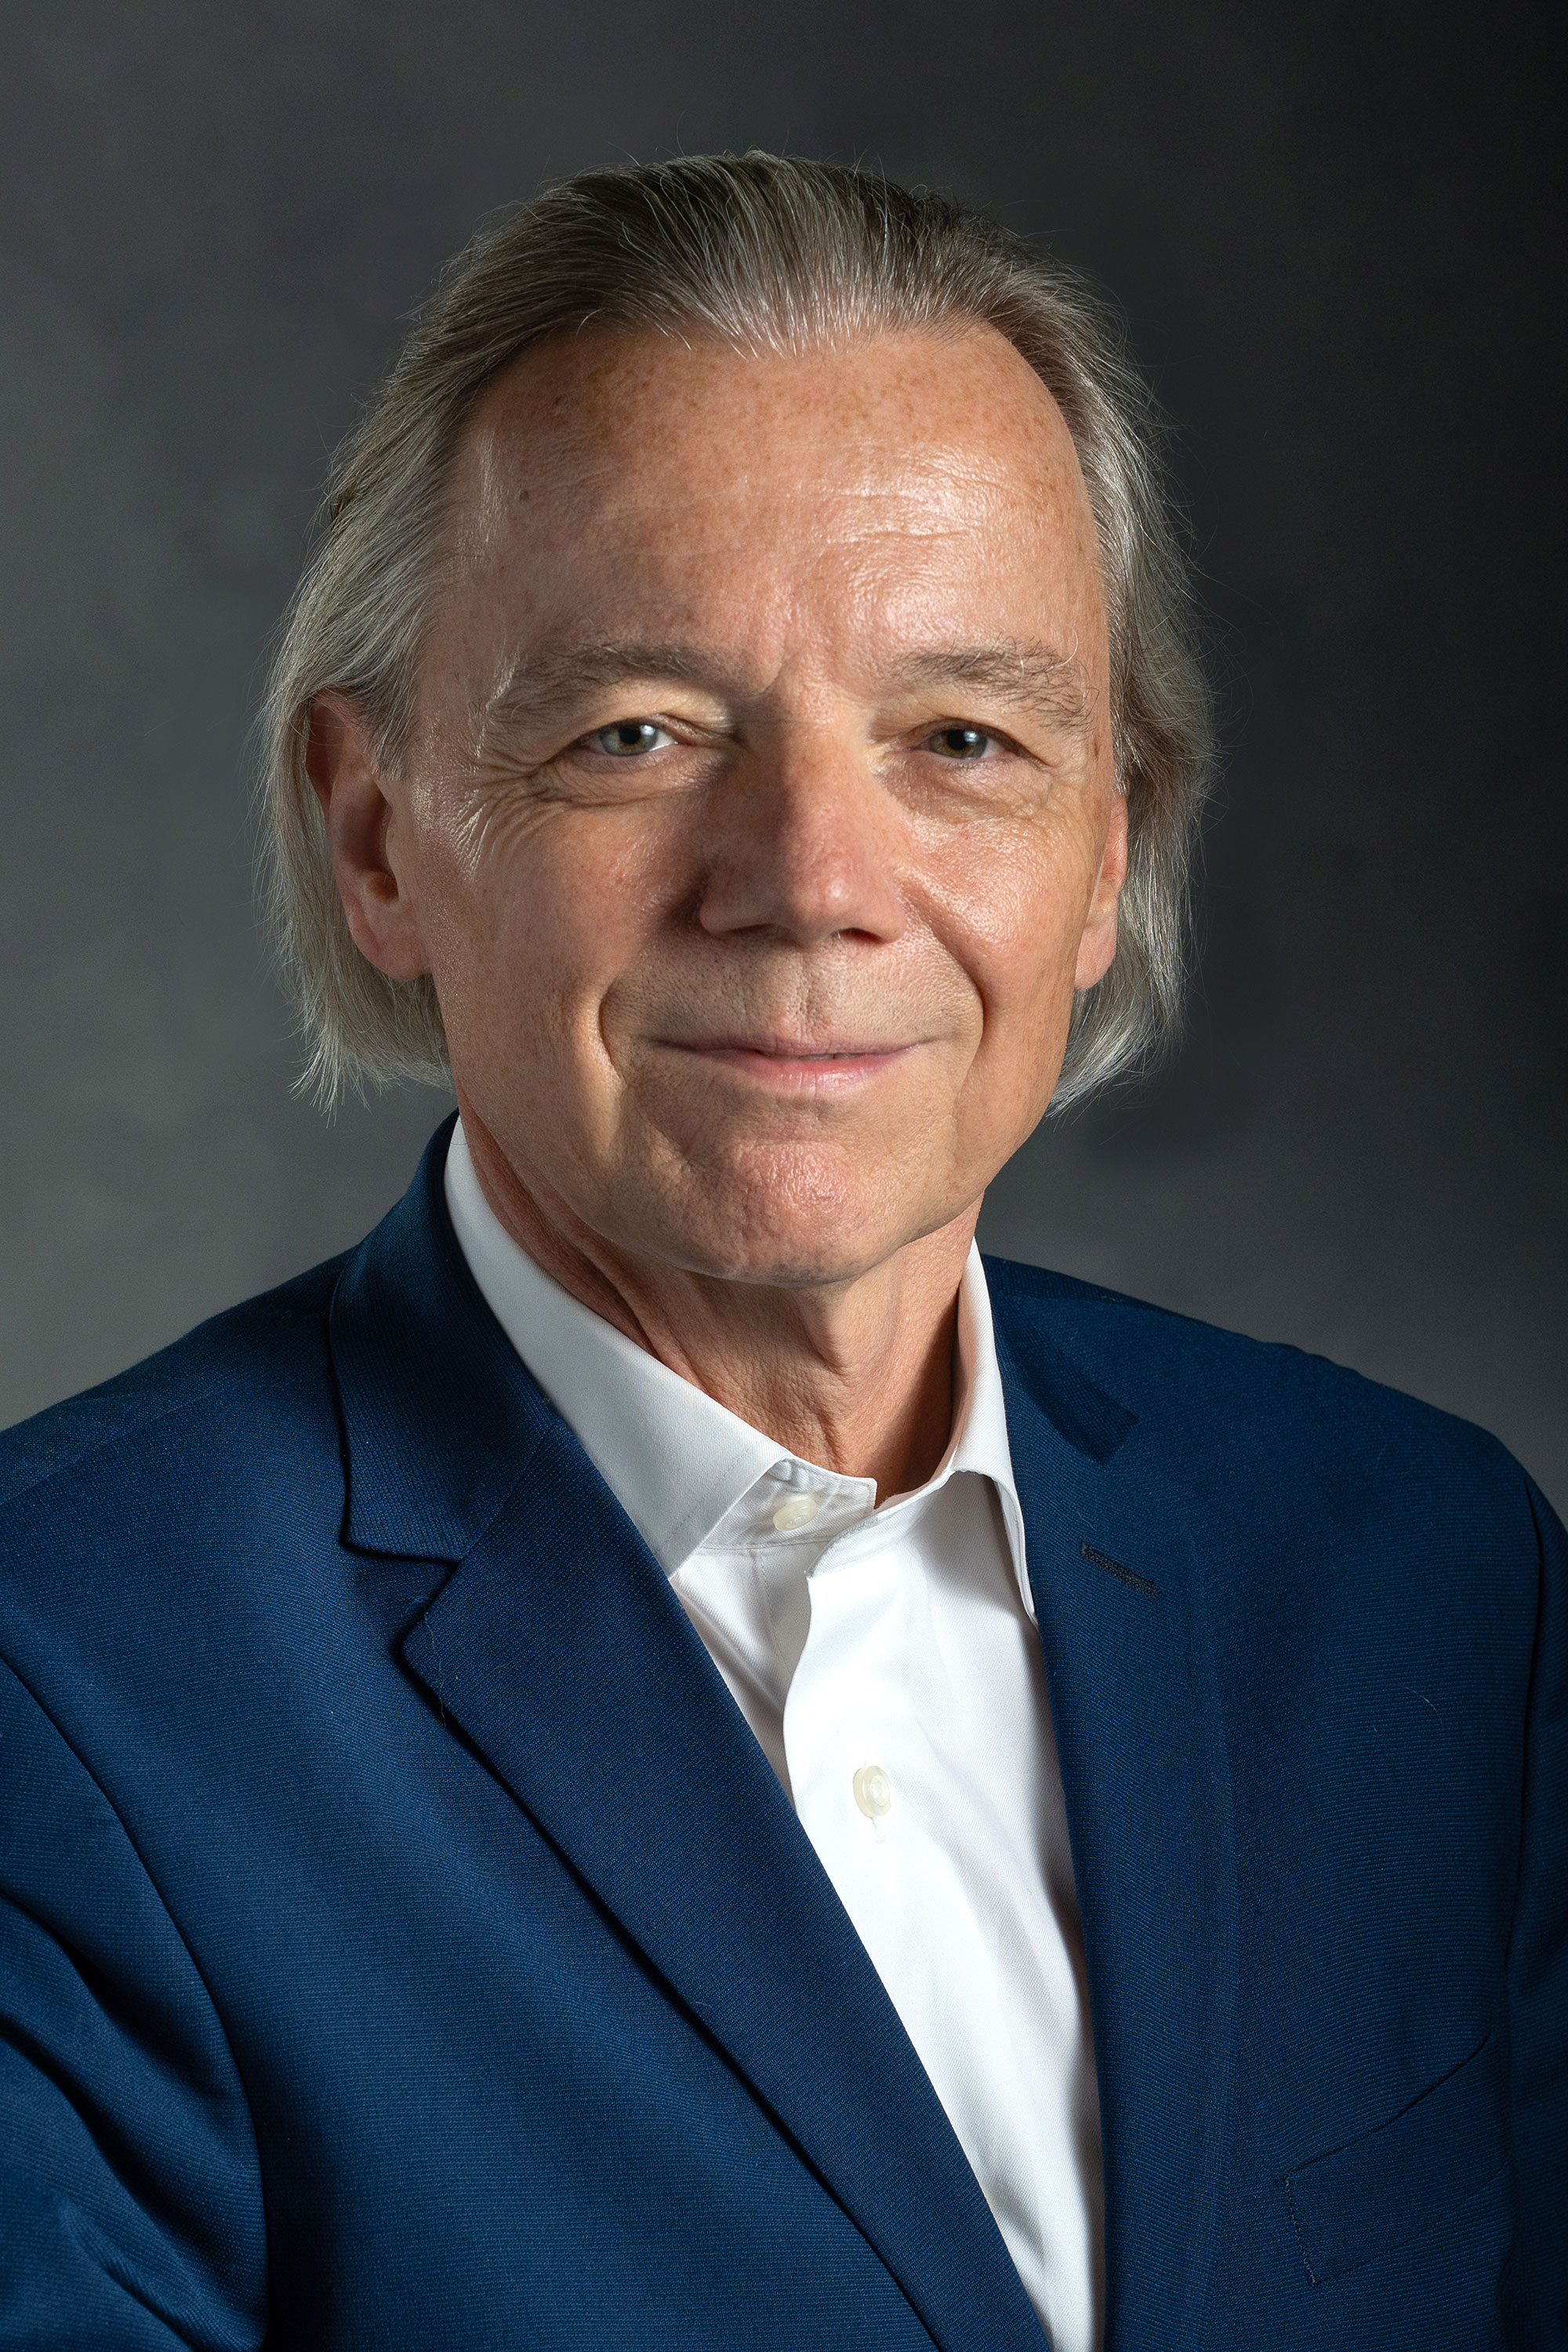 A headshot of Johannes Bauer posing in front of a gray background. He is wearing a navy suit jacket and white dress shirt